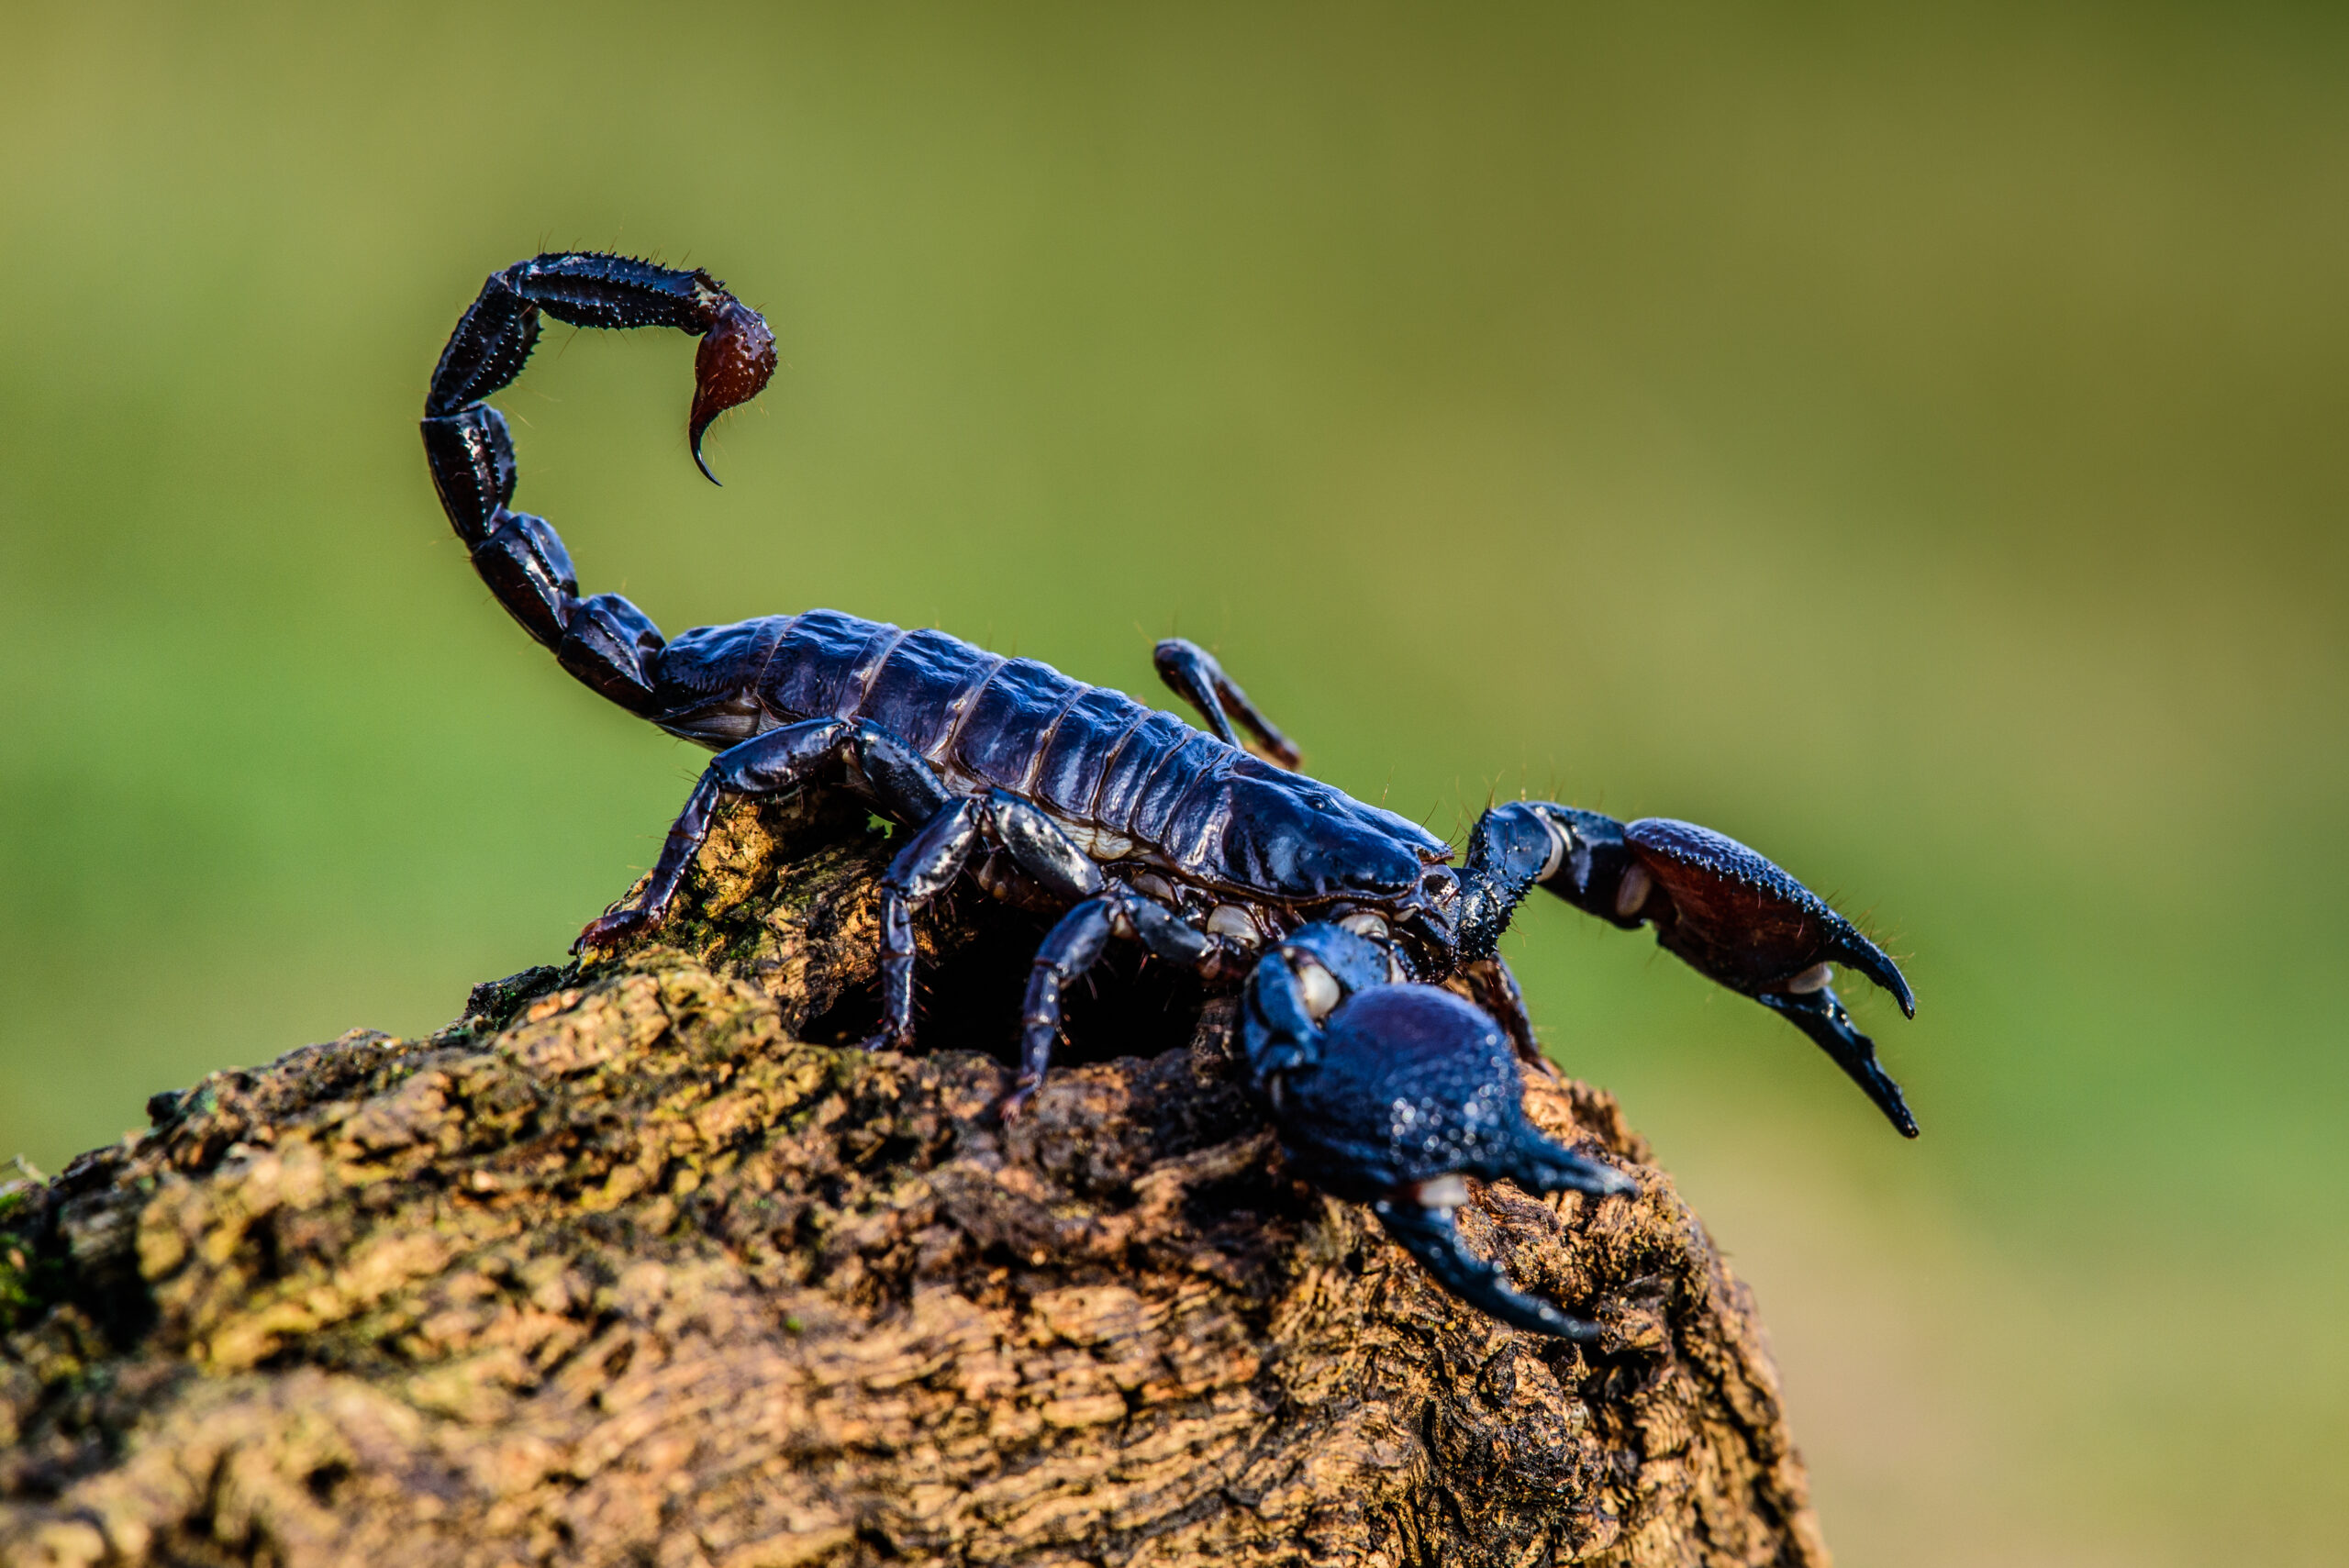 The Emperor Scorpion, a species of scorpion native to rainforests, photographed up close. The scorpion has a shiny black exoskeleton and large pincers, and its curved tail with a venomous stinger.